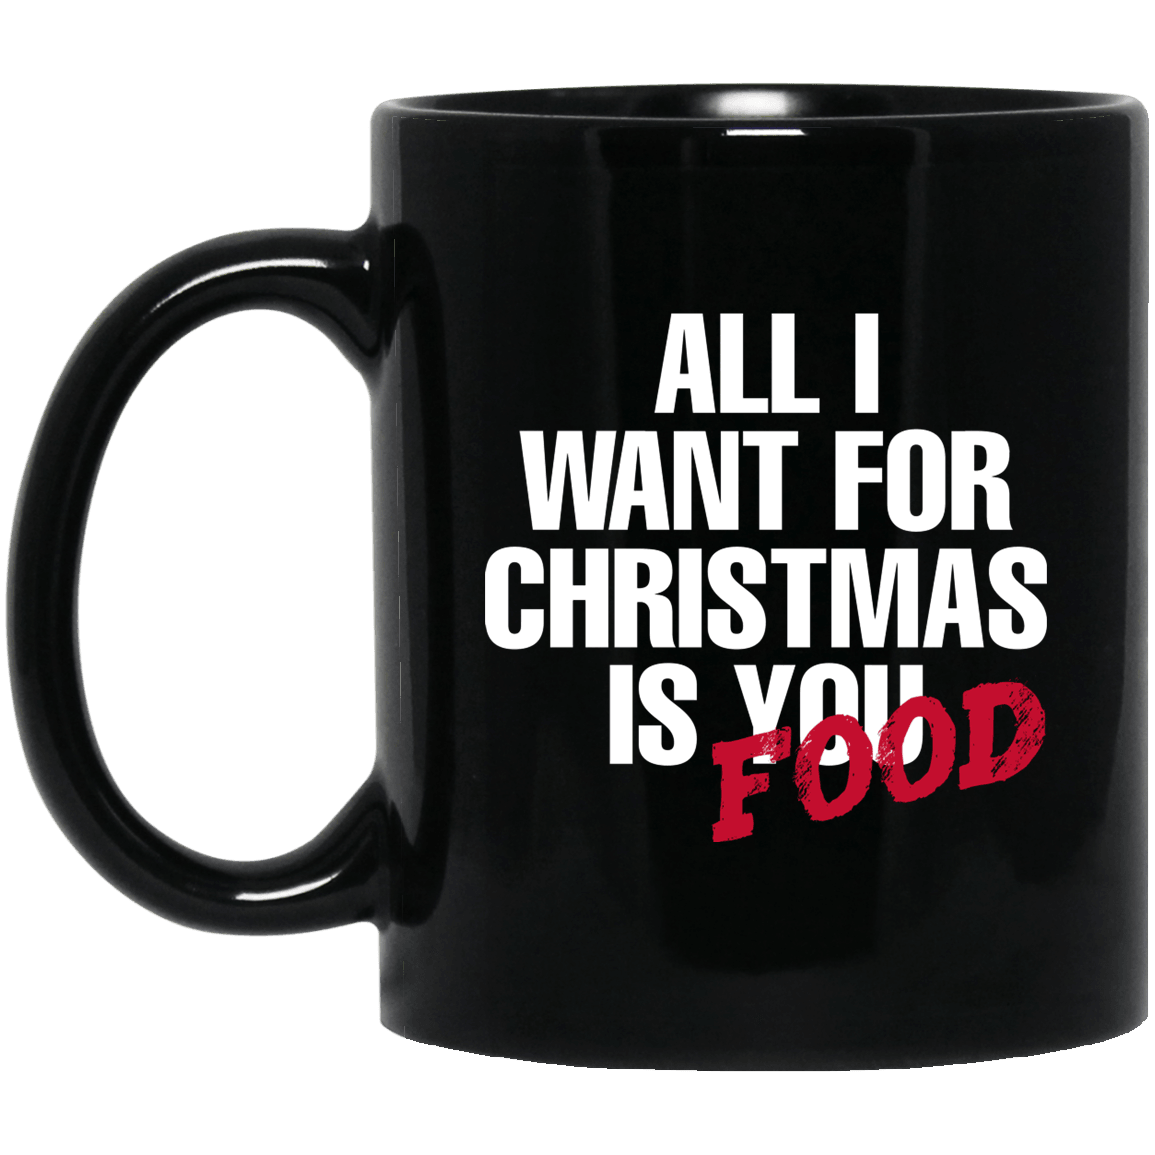 Designs by MyUtopia Shout Out:All I Want For Christmas Is Food - Ceramic Coffee Mug - Black,Black / 11 oz,Apparel